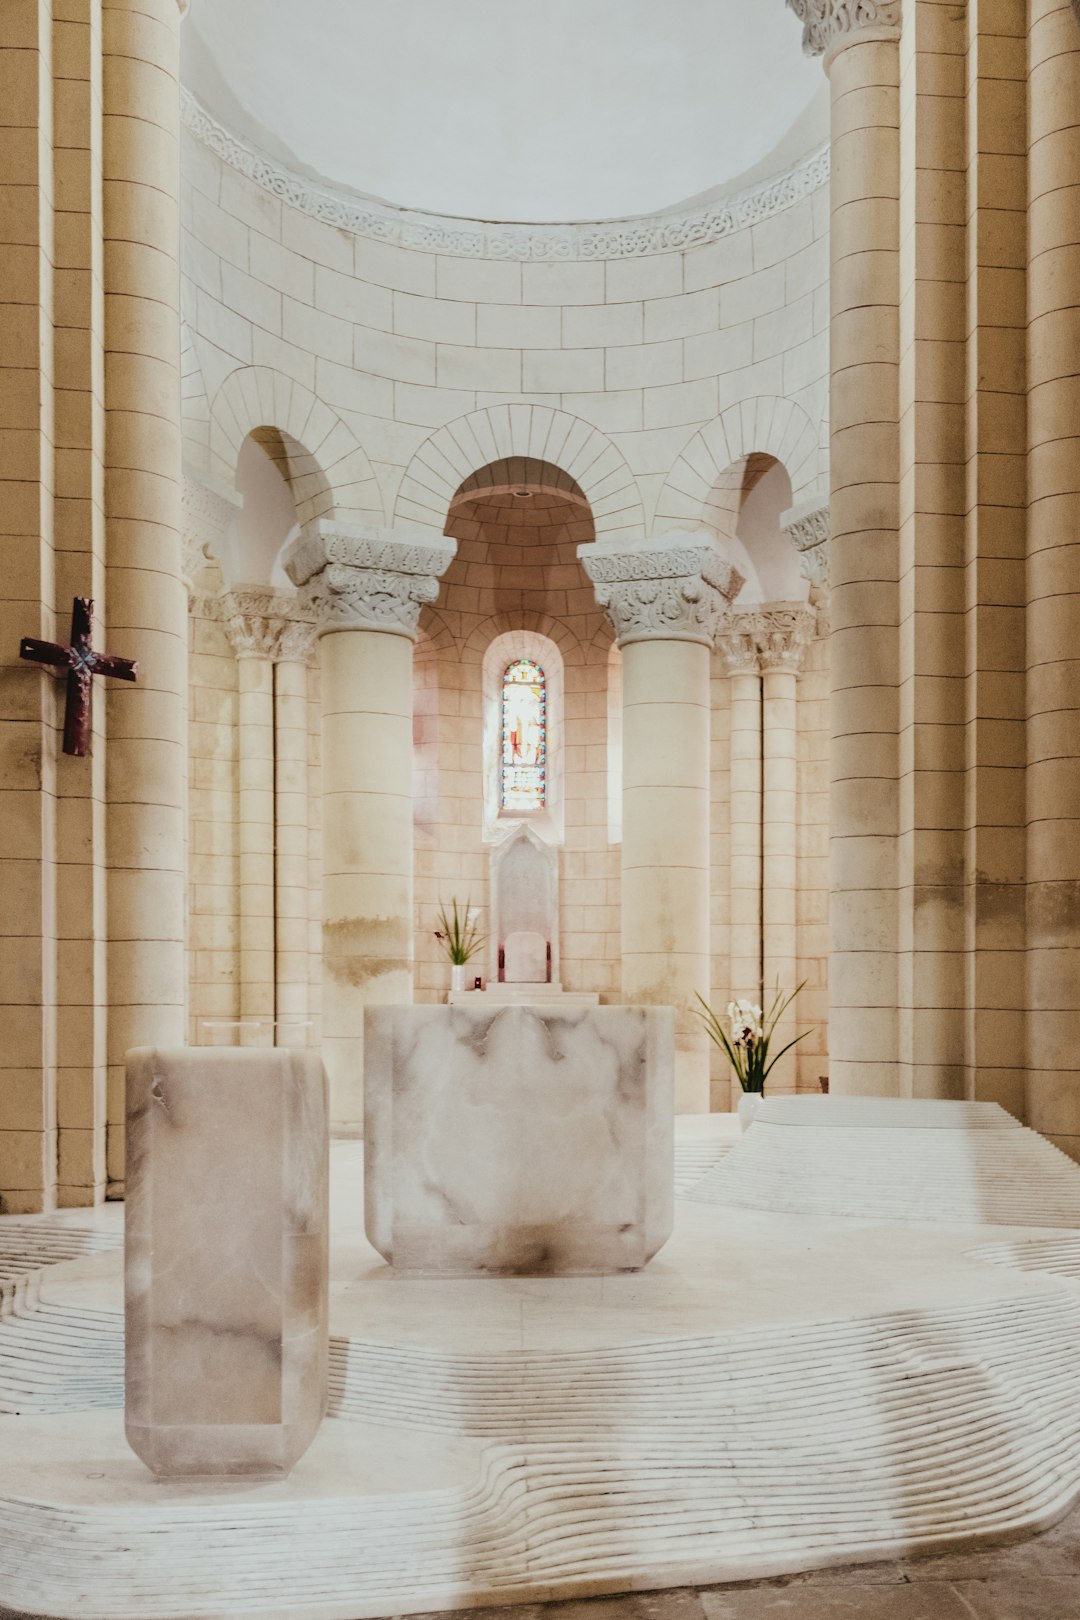 travelers stories about Place of worship in Saint-Hilaire, France